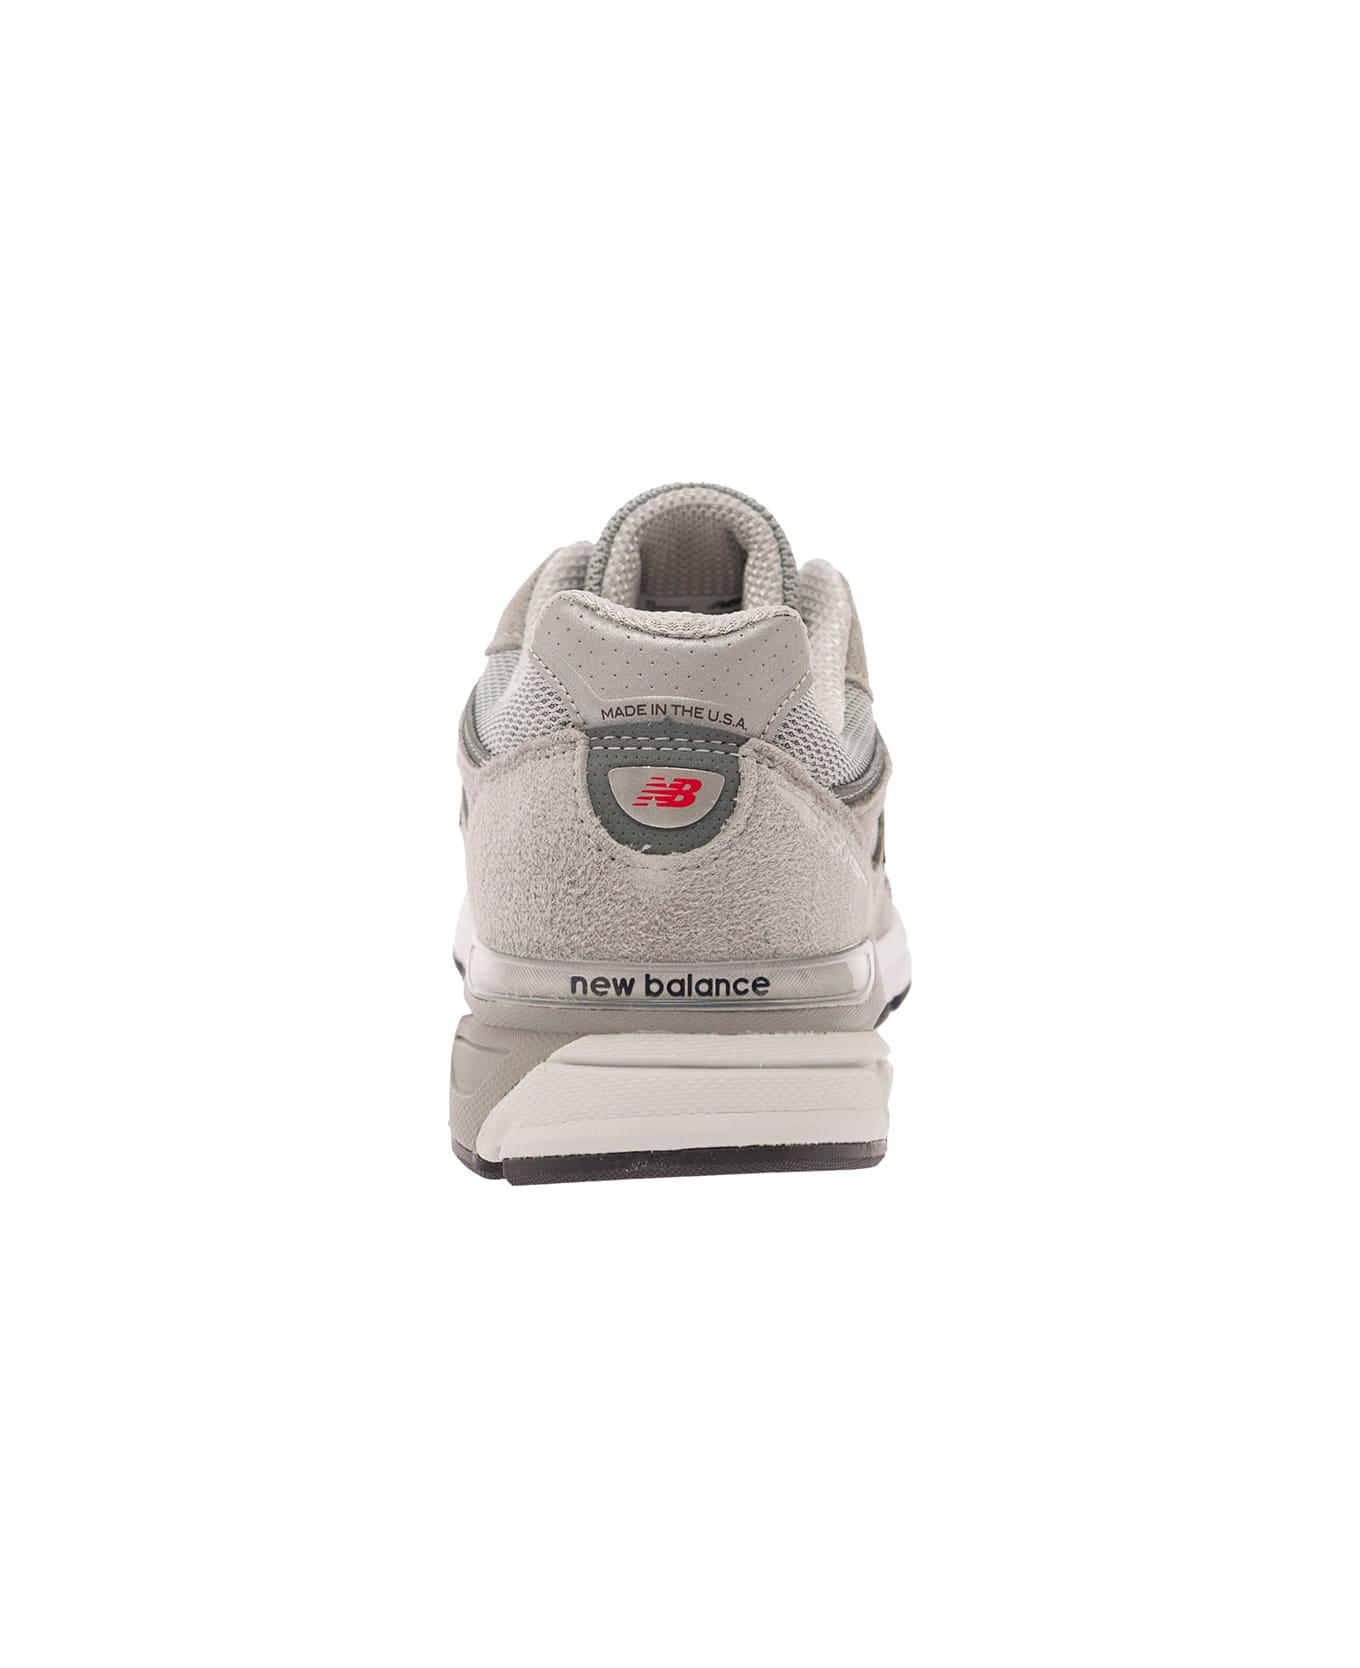 New Balance '990' Grey Low Top Sneakers With Logo Detail In Leather And Suede Woman - Grey スニーカー